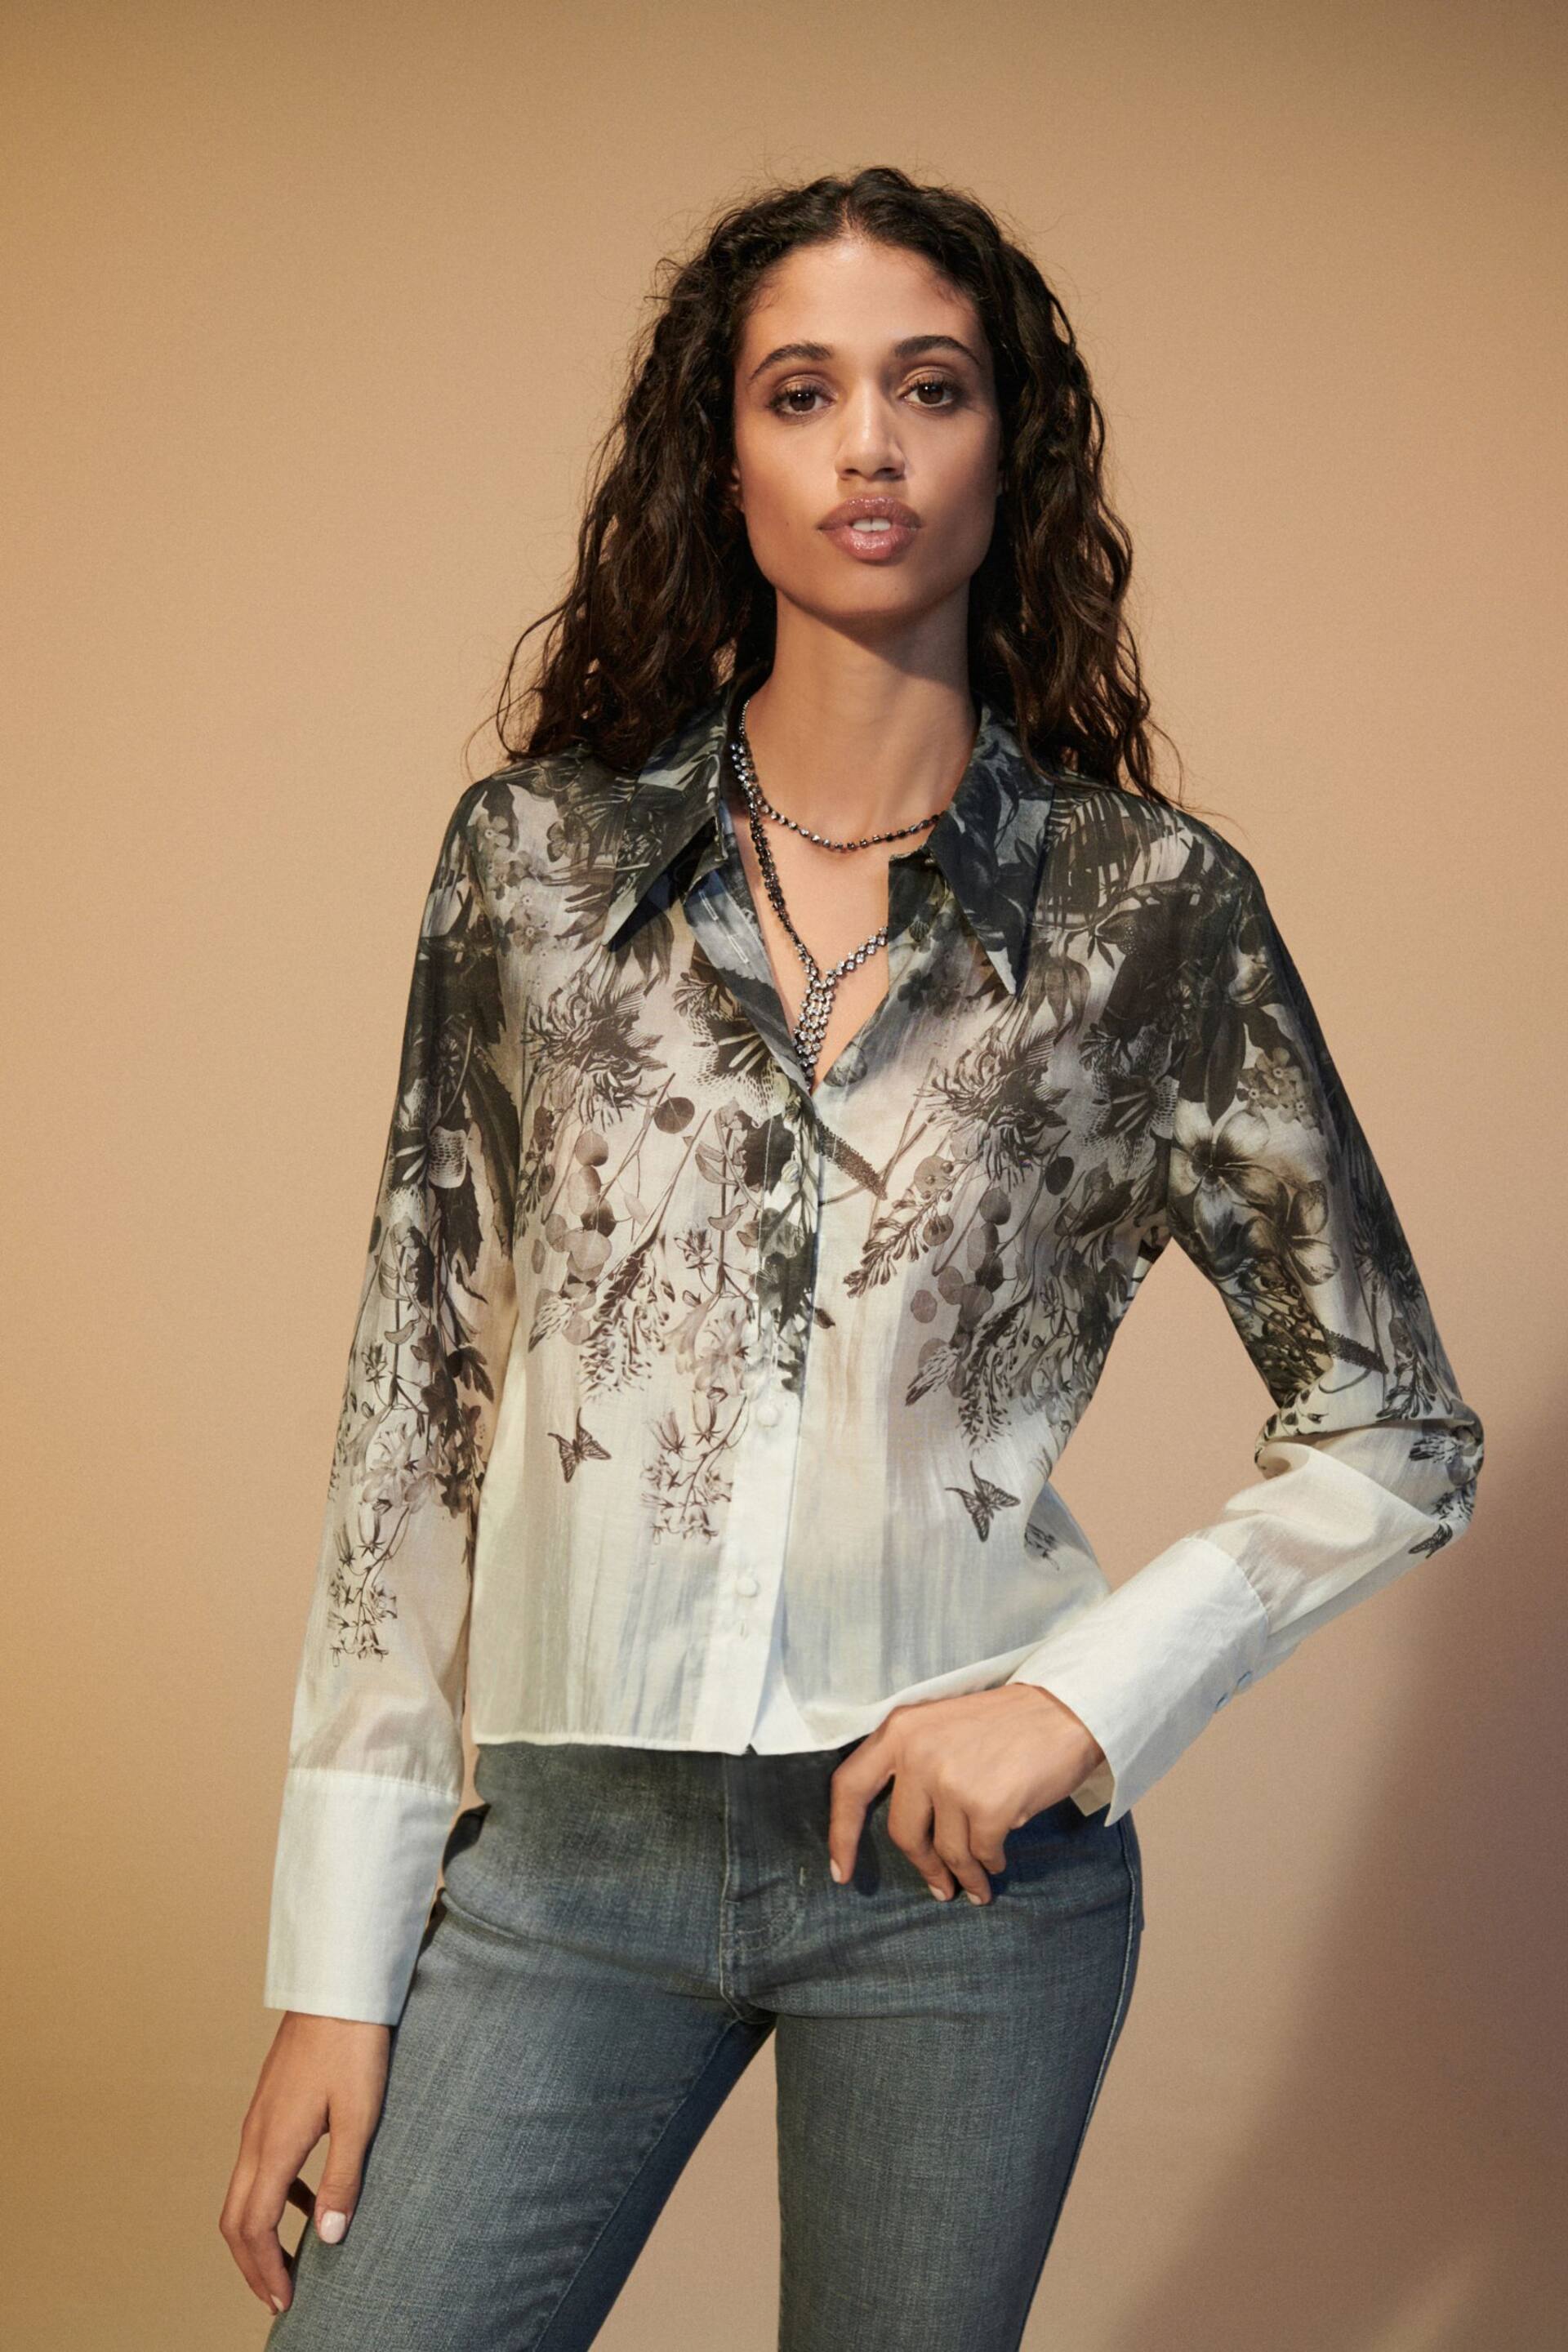 Monochrome Floral Placement Sheer Placement Print Long Sleeve Shirt - Image 1 of 7